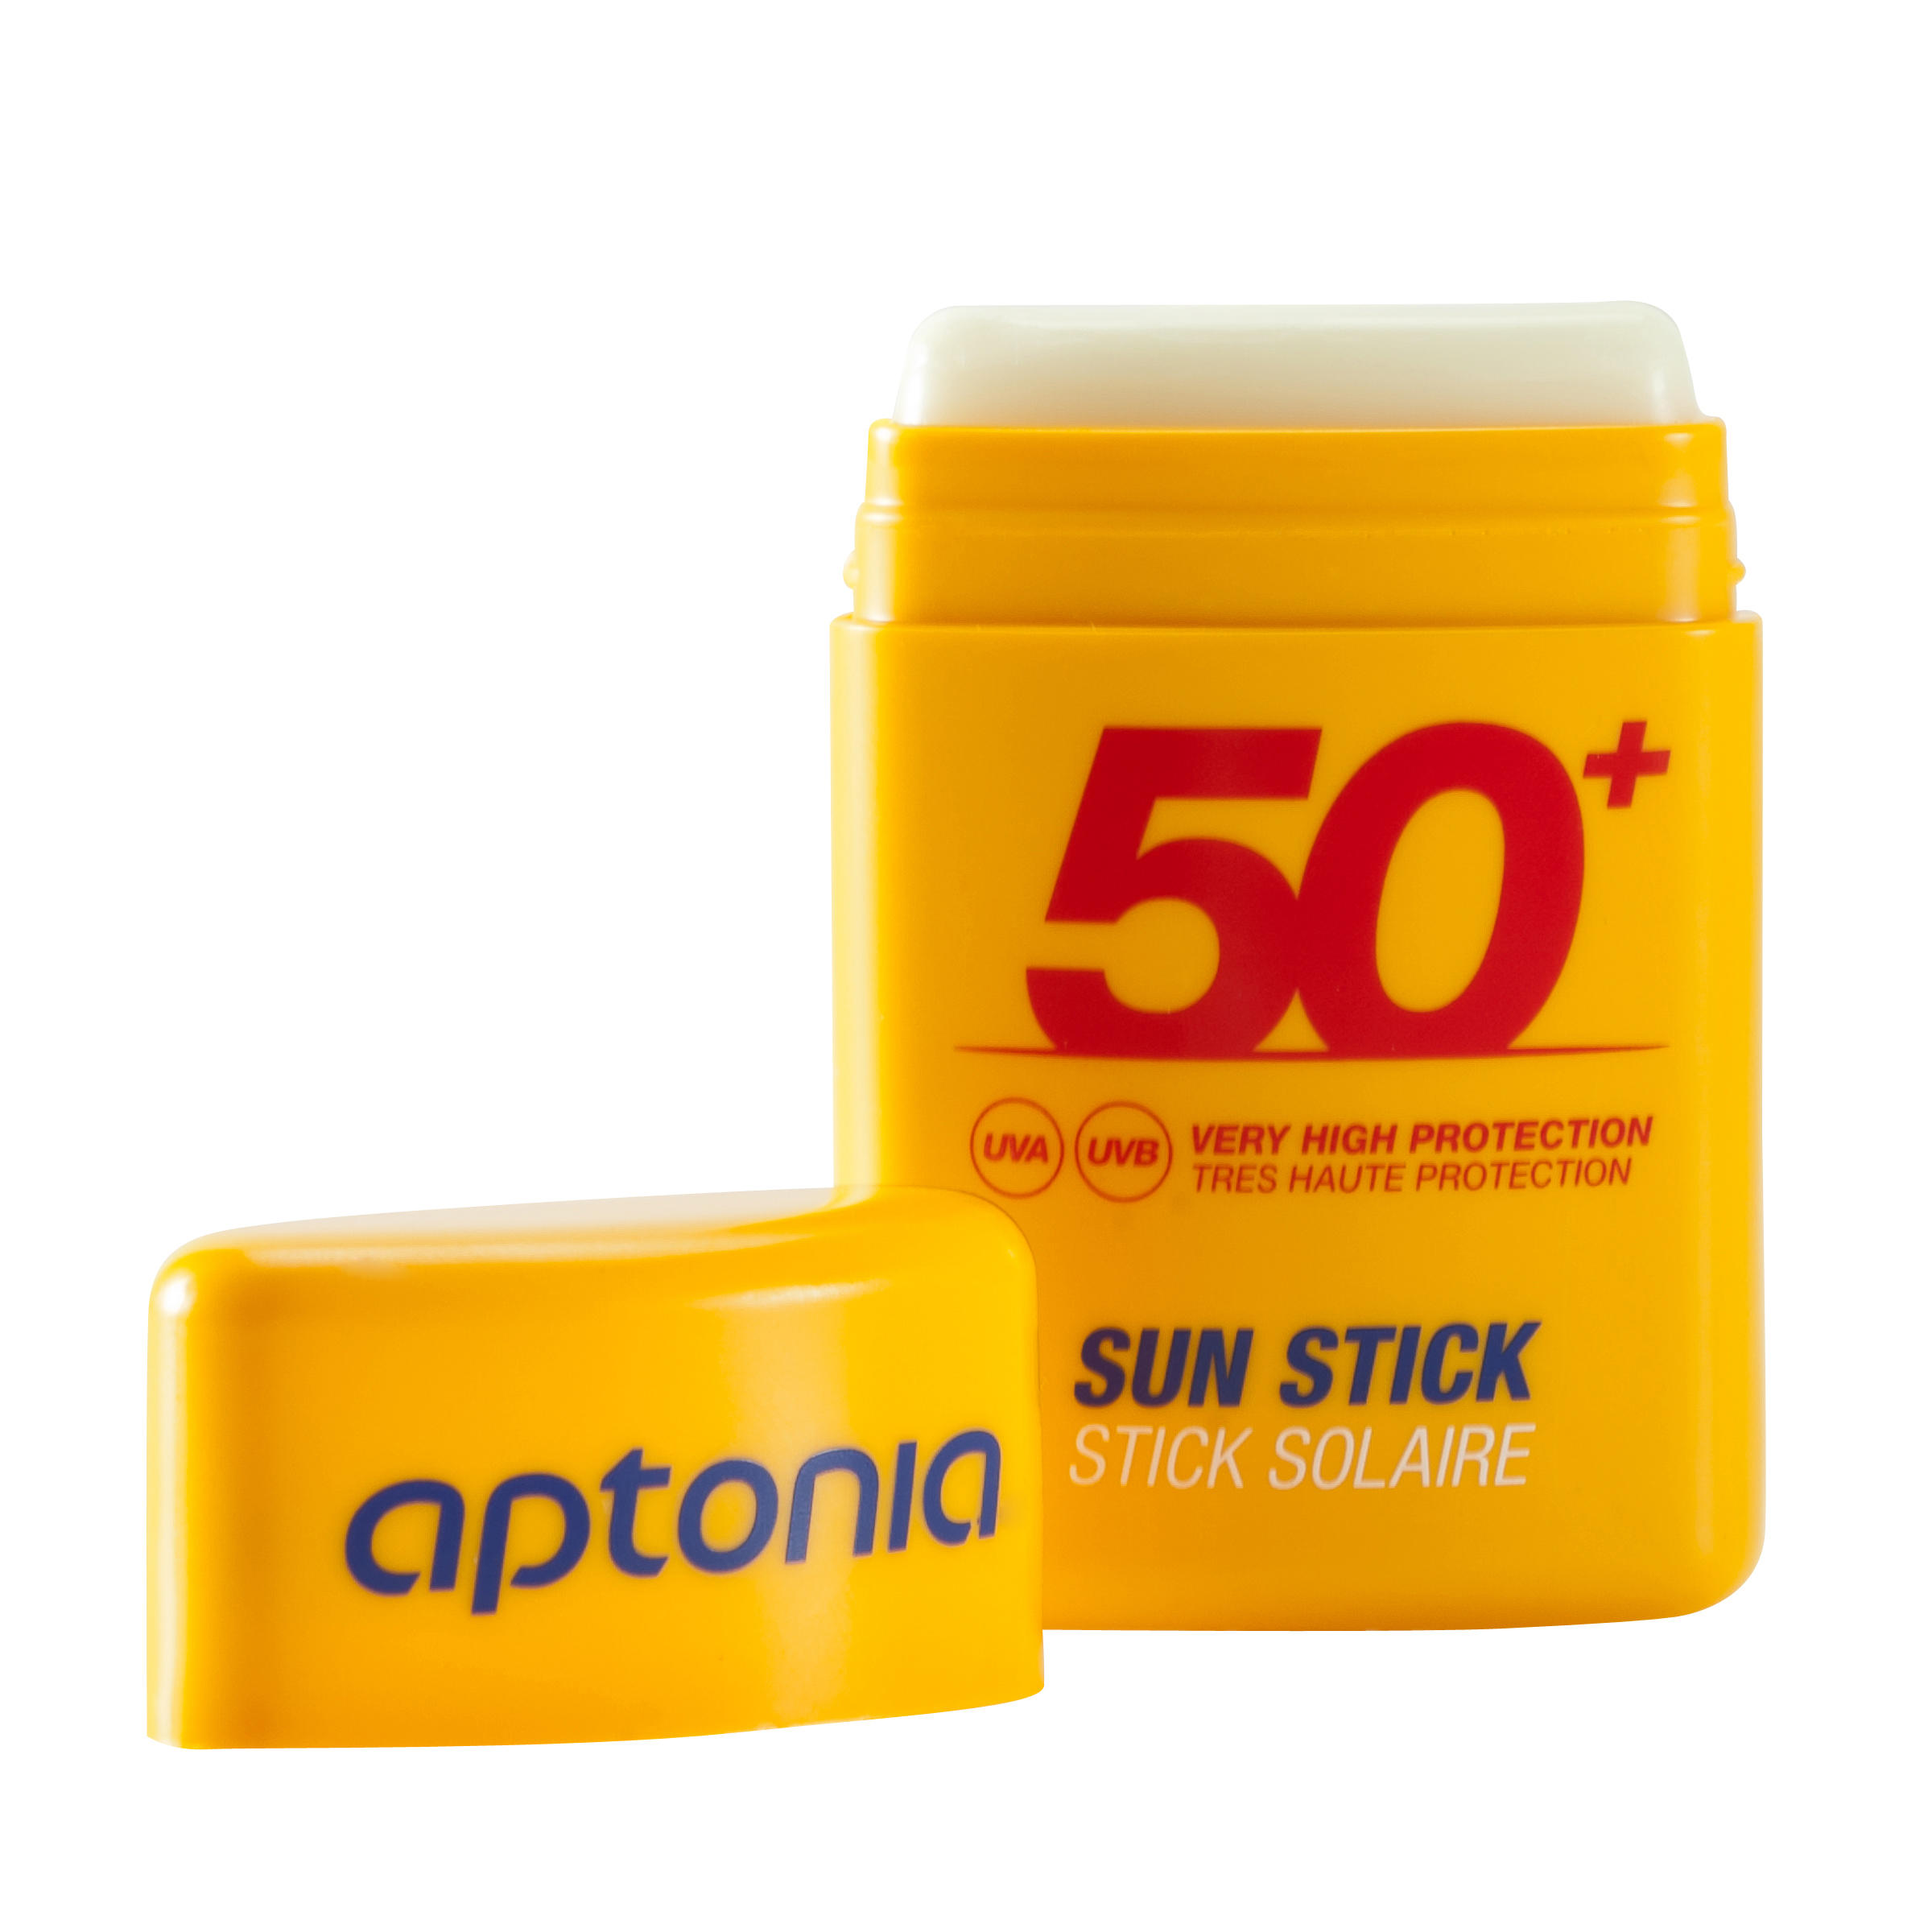 2-in-1 SPF 50+ sunscreen stick for face and lips 2/6